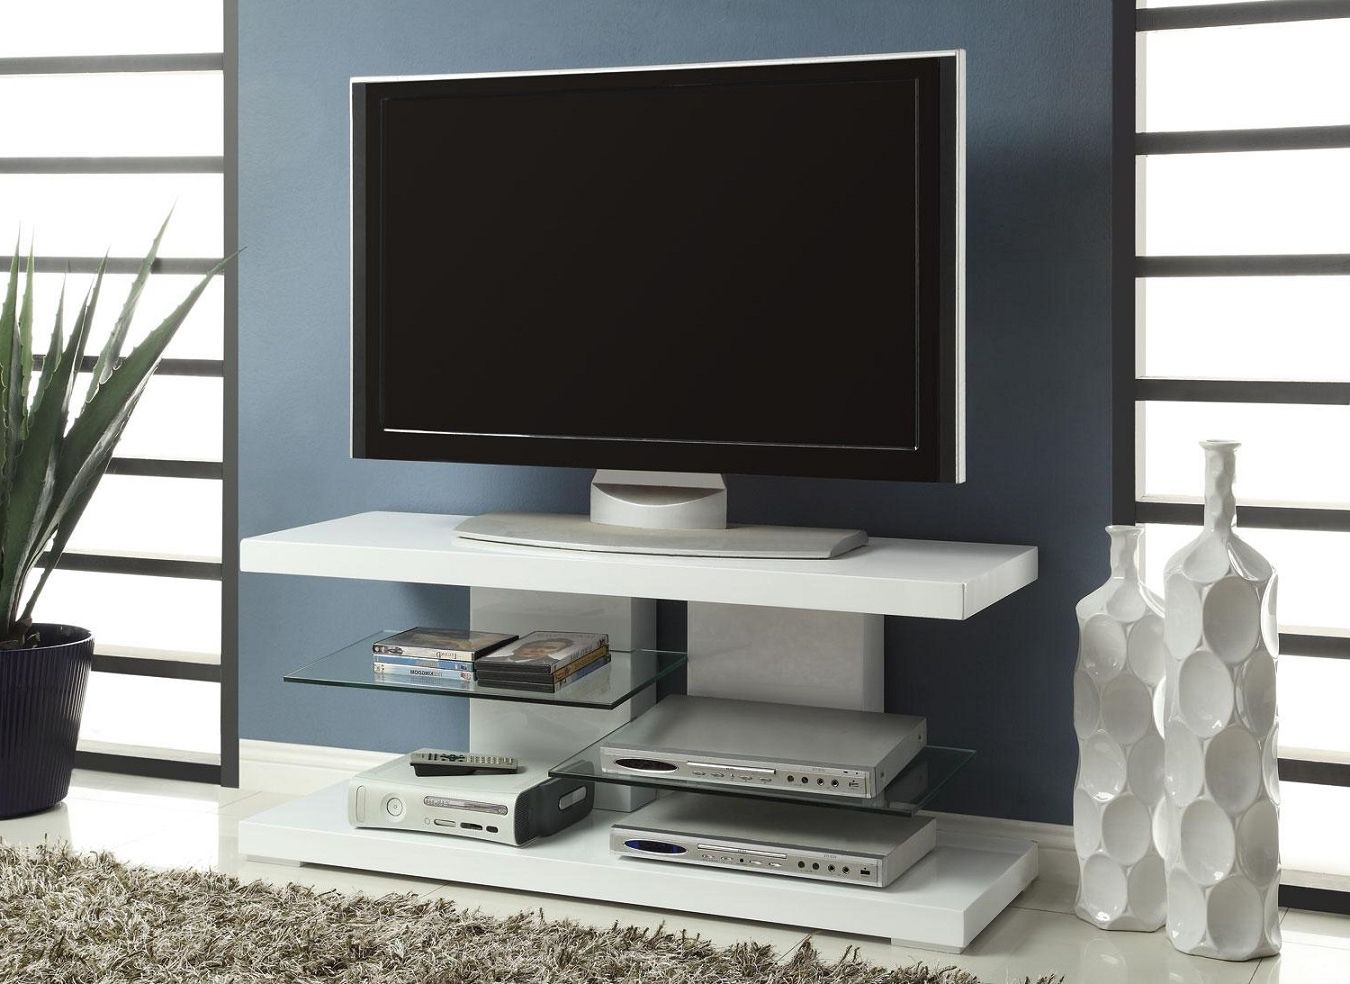 Iconic Tv Stands Intended For Well Known Tv Stands: Glamorous Bush Tv Stands Bush Industries Furniture, Bush (View 8 of 20)